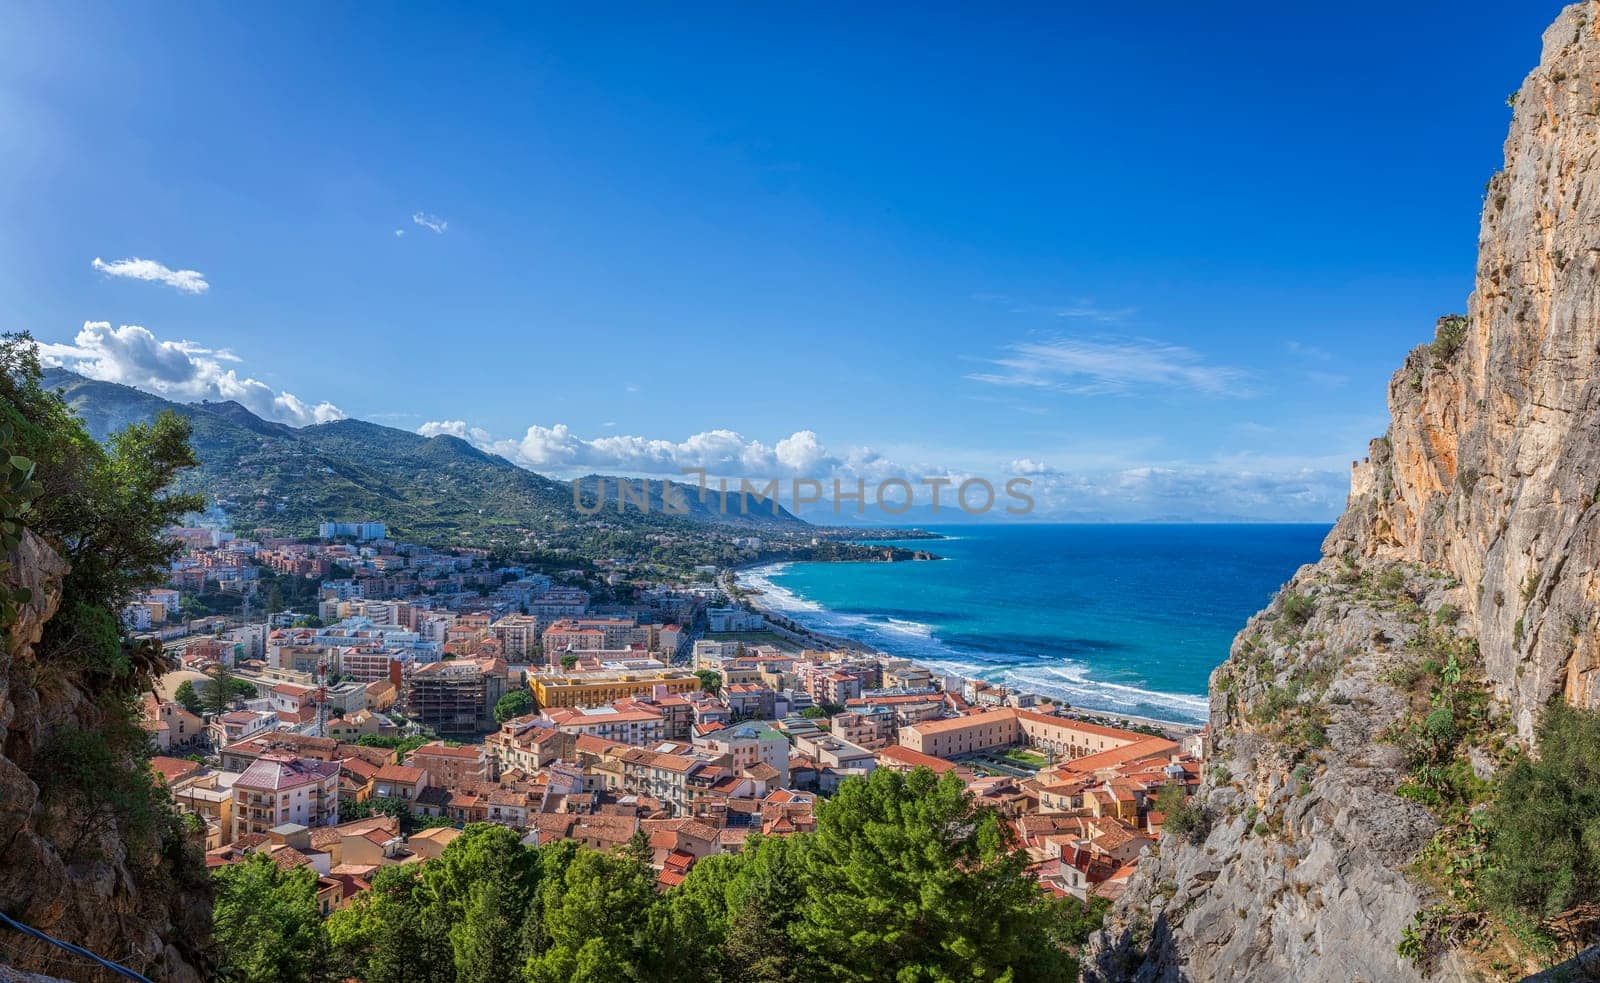 The coast of Cefalu in Sicily, Italy on a beautiful sunny day by EdVal